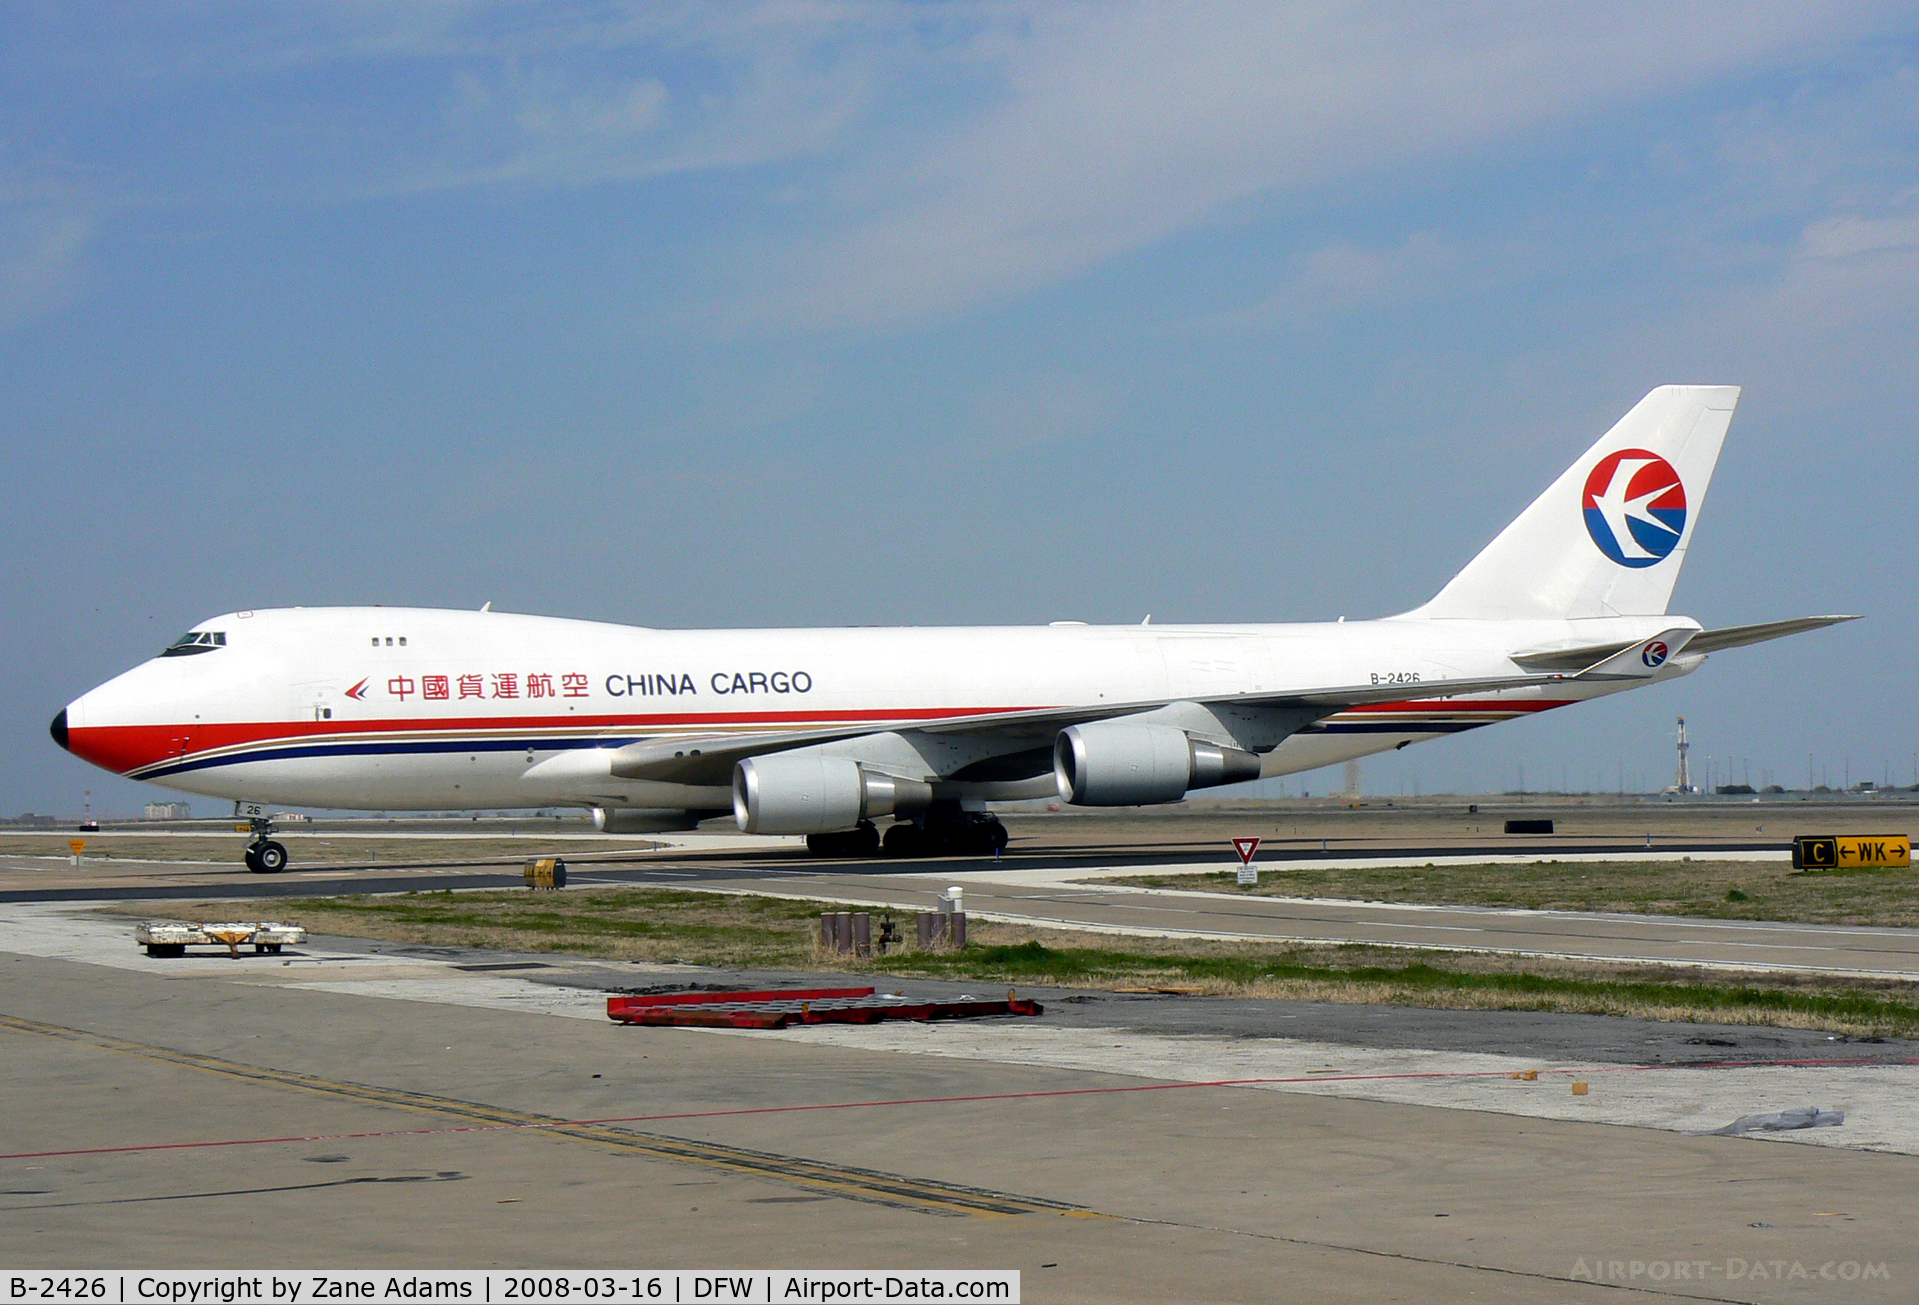 B-2426, 2007 Boeing 747-40BF/ER/SCD C/N 35208/1392, China Cargo 747 pulling into the west freight area at DFW